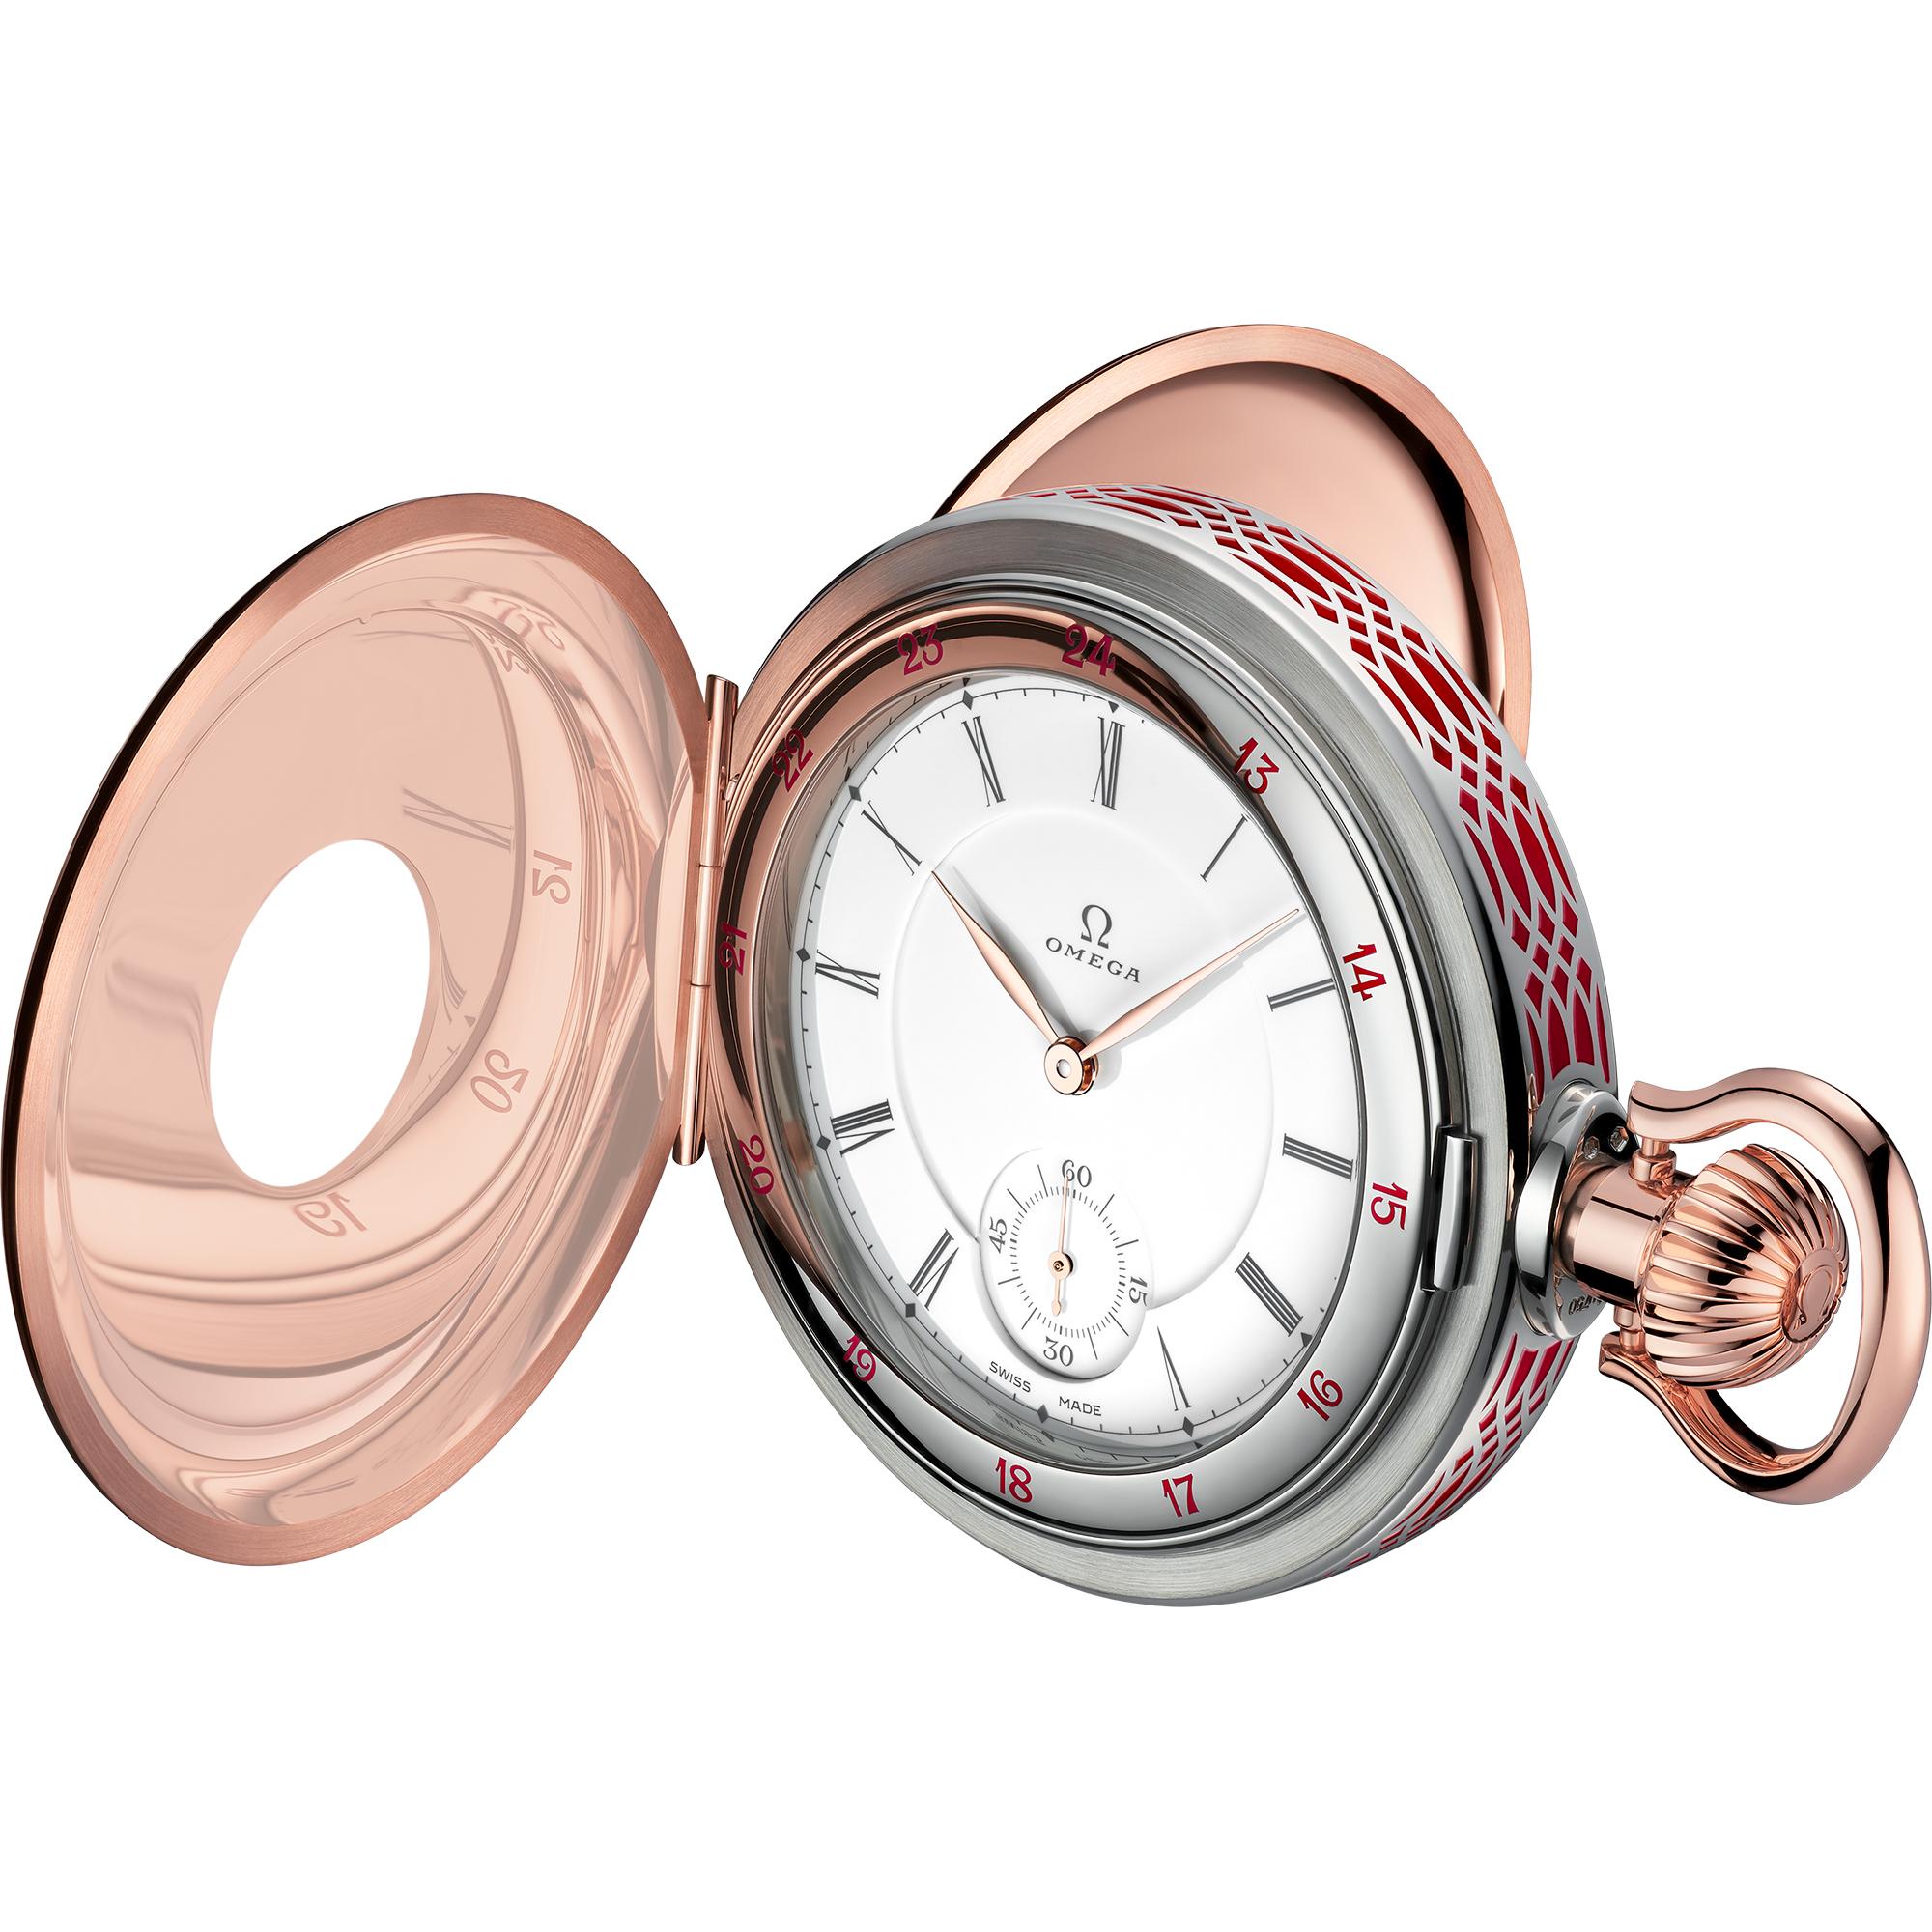 Specialities OMEGA 125th Anniversary Pocket Watch 60 mm, Sedna™ gold - Canopus Gold™ - 518.62.60.00.04.001